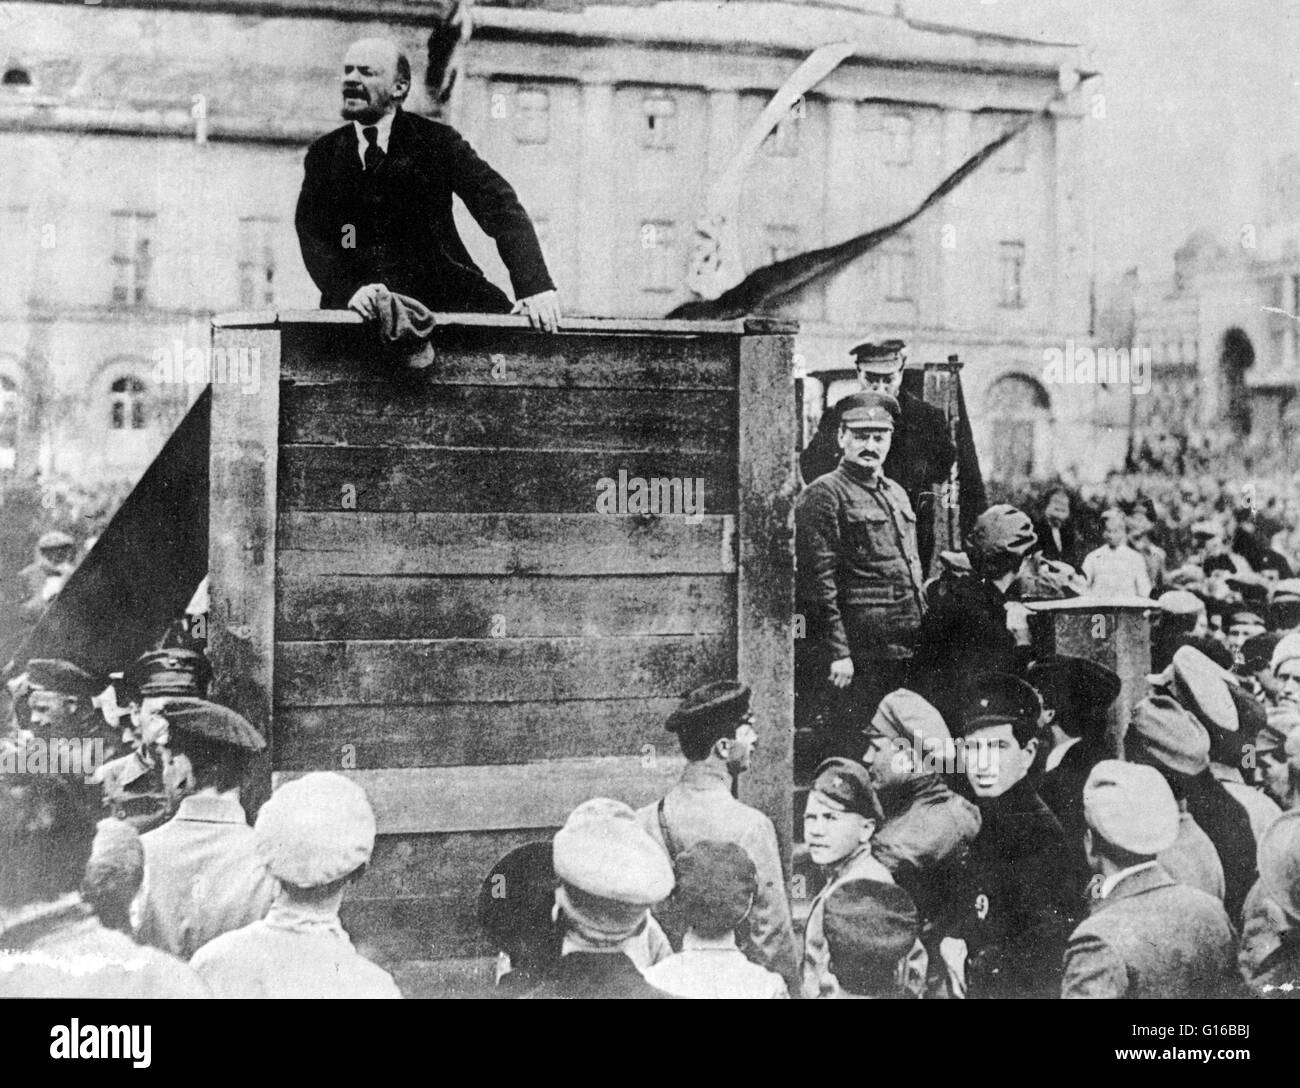 Lenin addressing Russian soldiers about to fight the Polish Army, Petrograd, Russia, 1920. Leon Trotsky and Lev Borisovich Kamenev stand at right. Vladimir Ilyich Lenin (April 22, 1870 - January 21, 1924) was a Russian Marxist revolutionary, communist pol Stock Photo